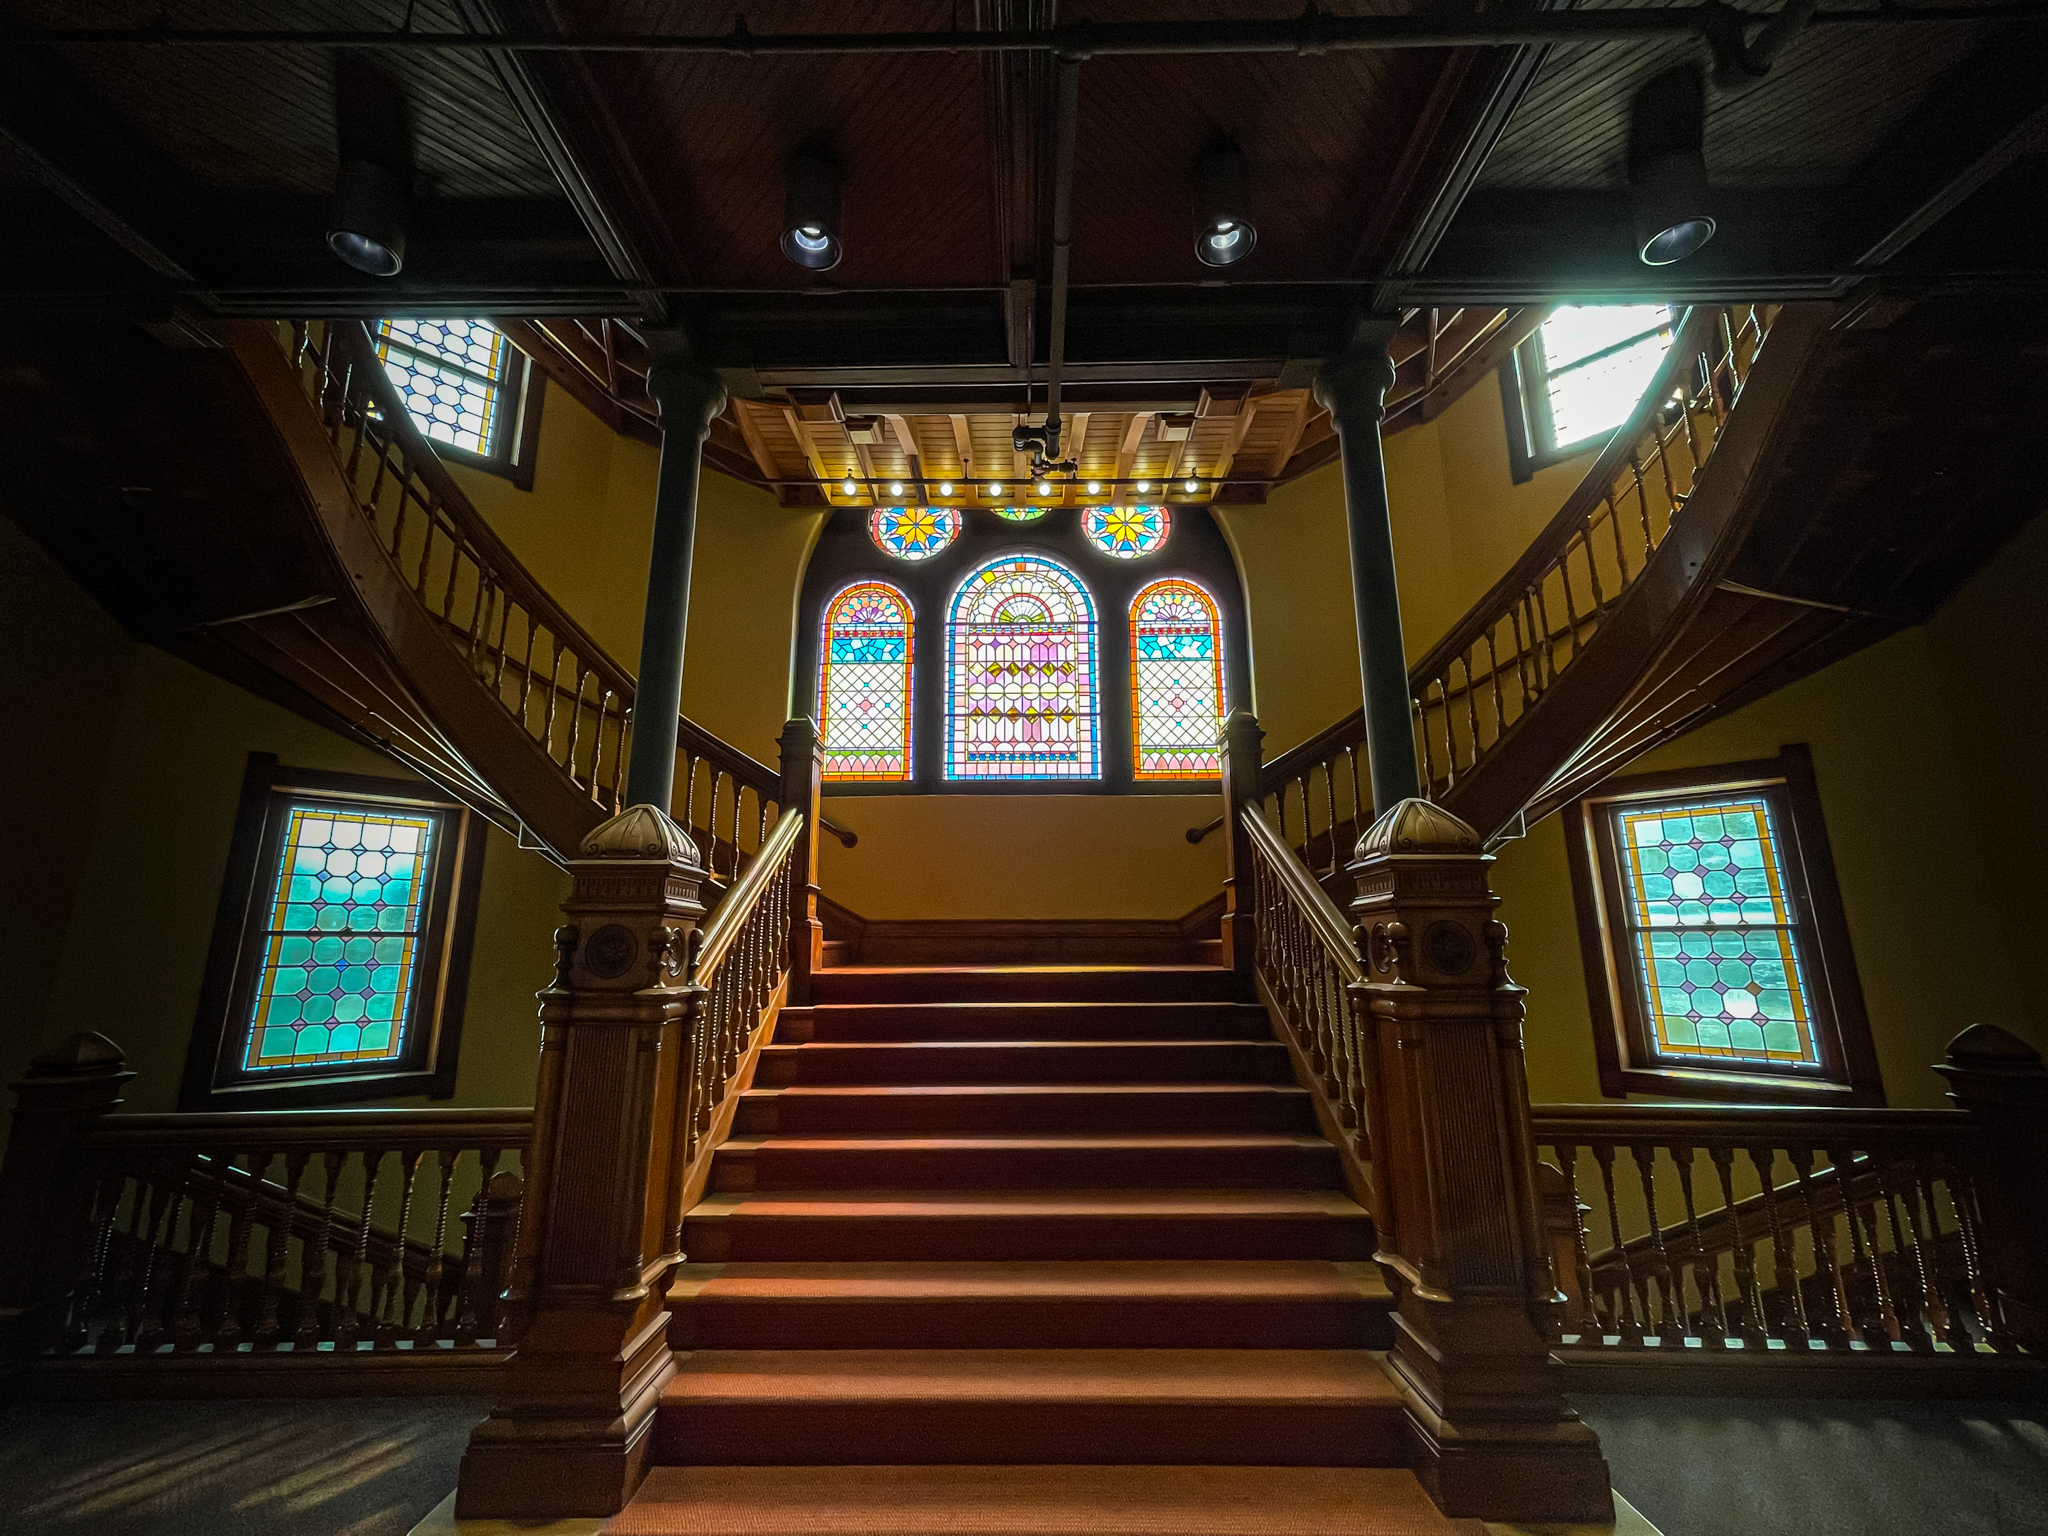 Crouse college staircase.